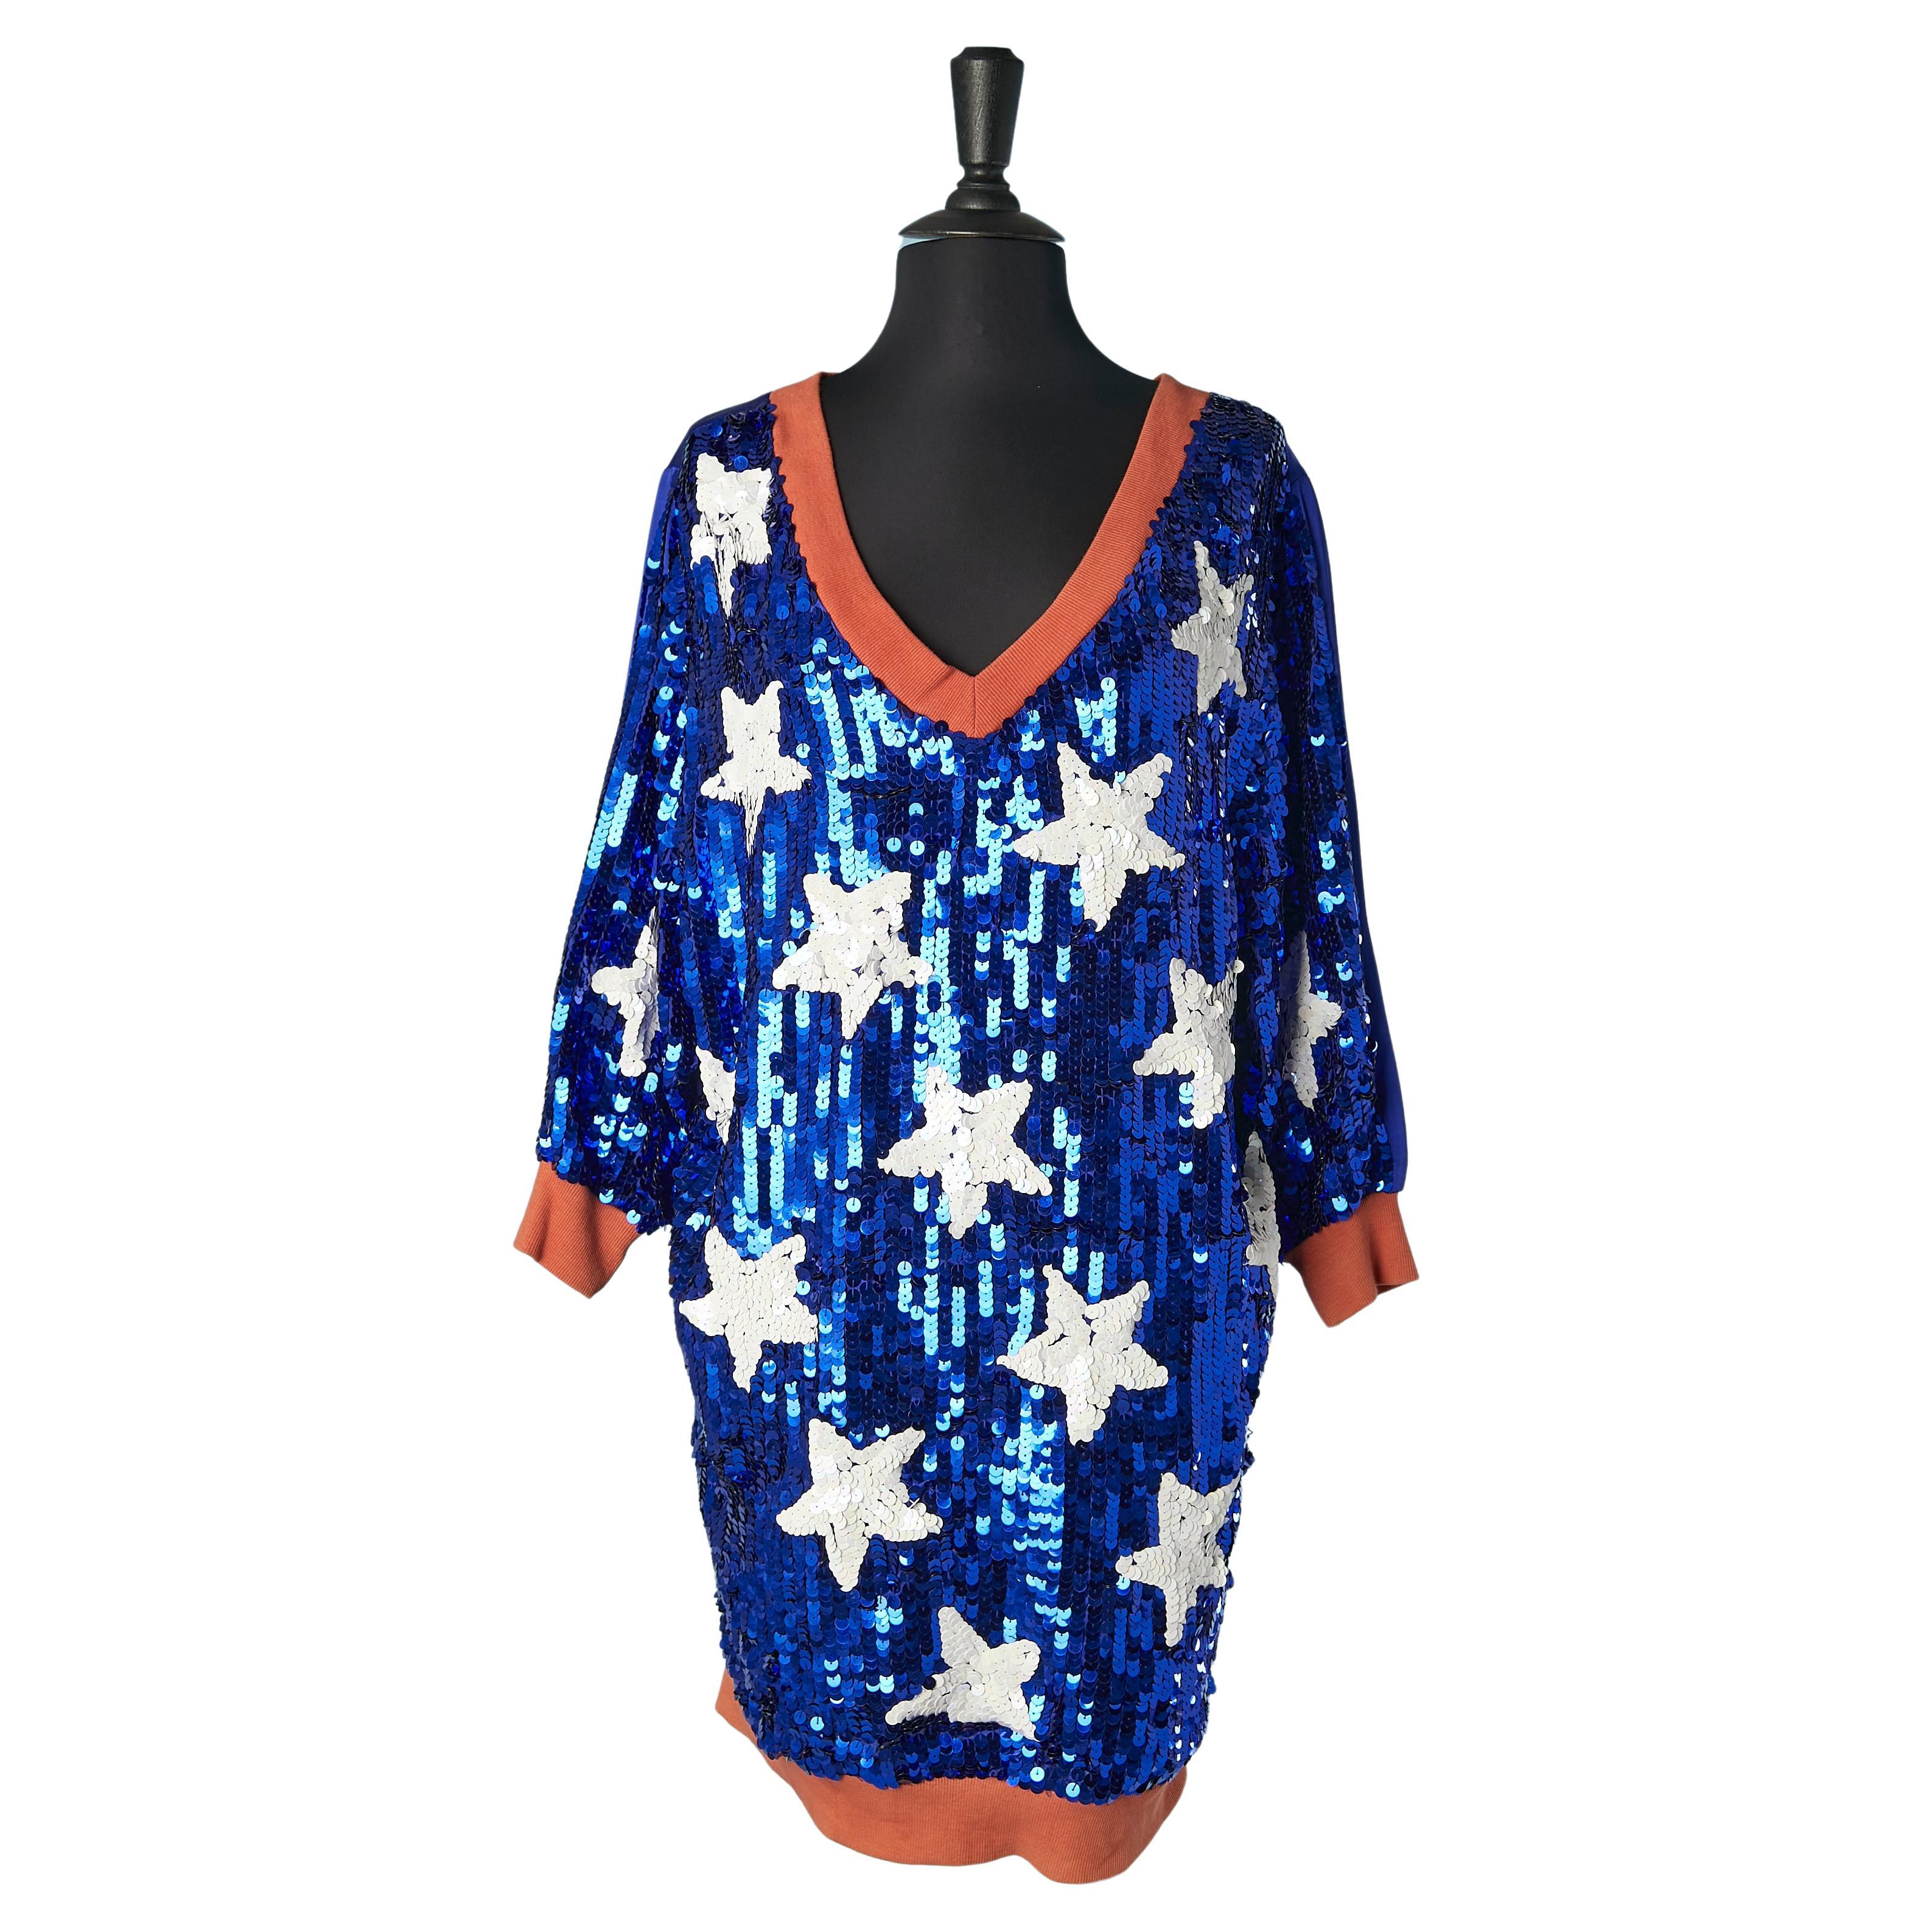 Blue sequin dress with white star sequins pattern JC/DC 